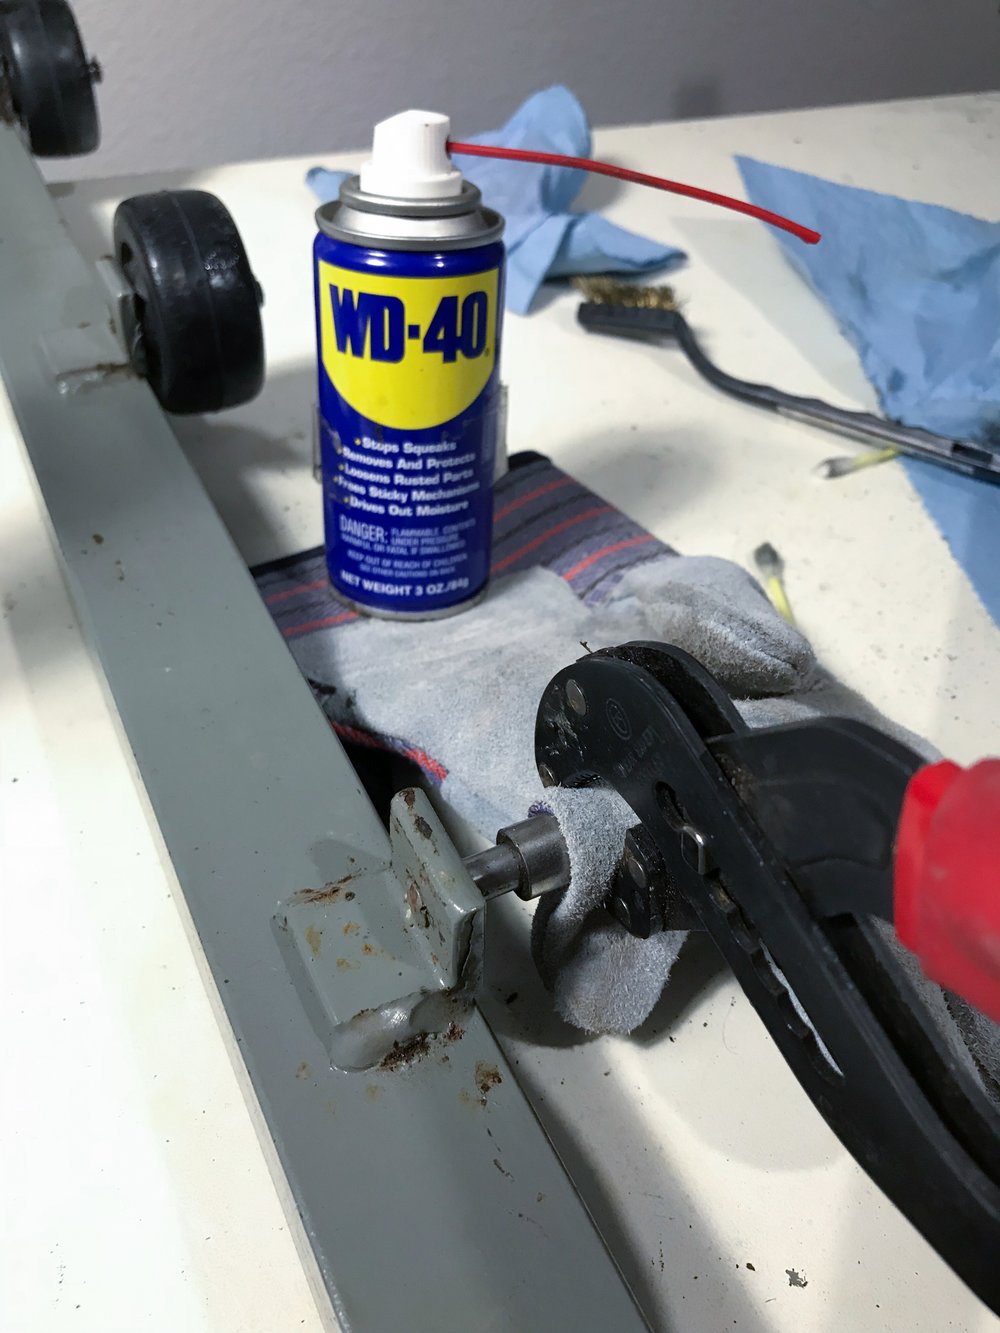  the enforcement crew: wd-40, pliers, and leather gloves. 